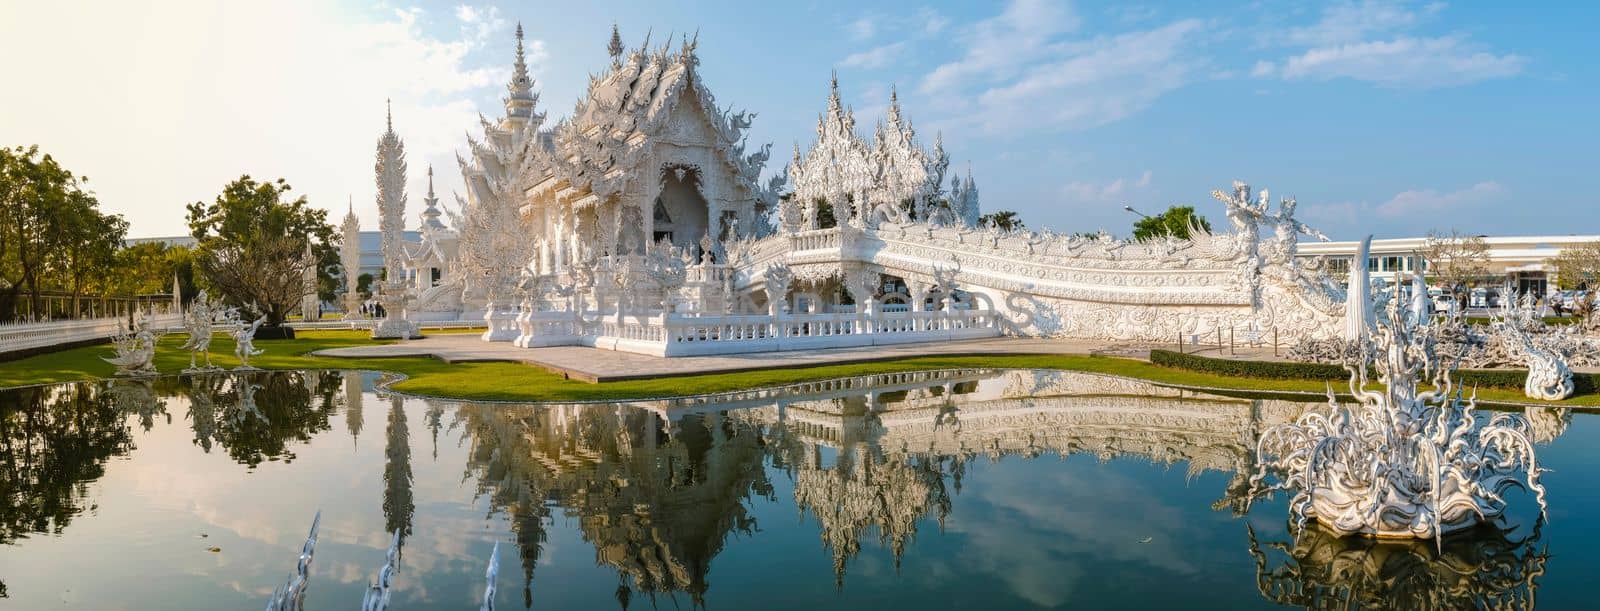 White temple Chiang Rai Thailand, Wat Rong Khun, aka The White Temple, in Chiang Rai, Thailand with a blue sky and reflection in the lake